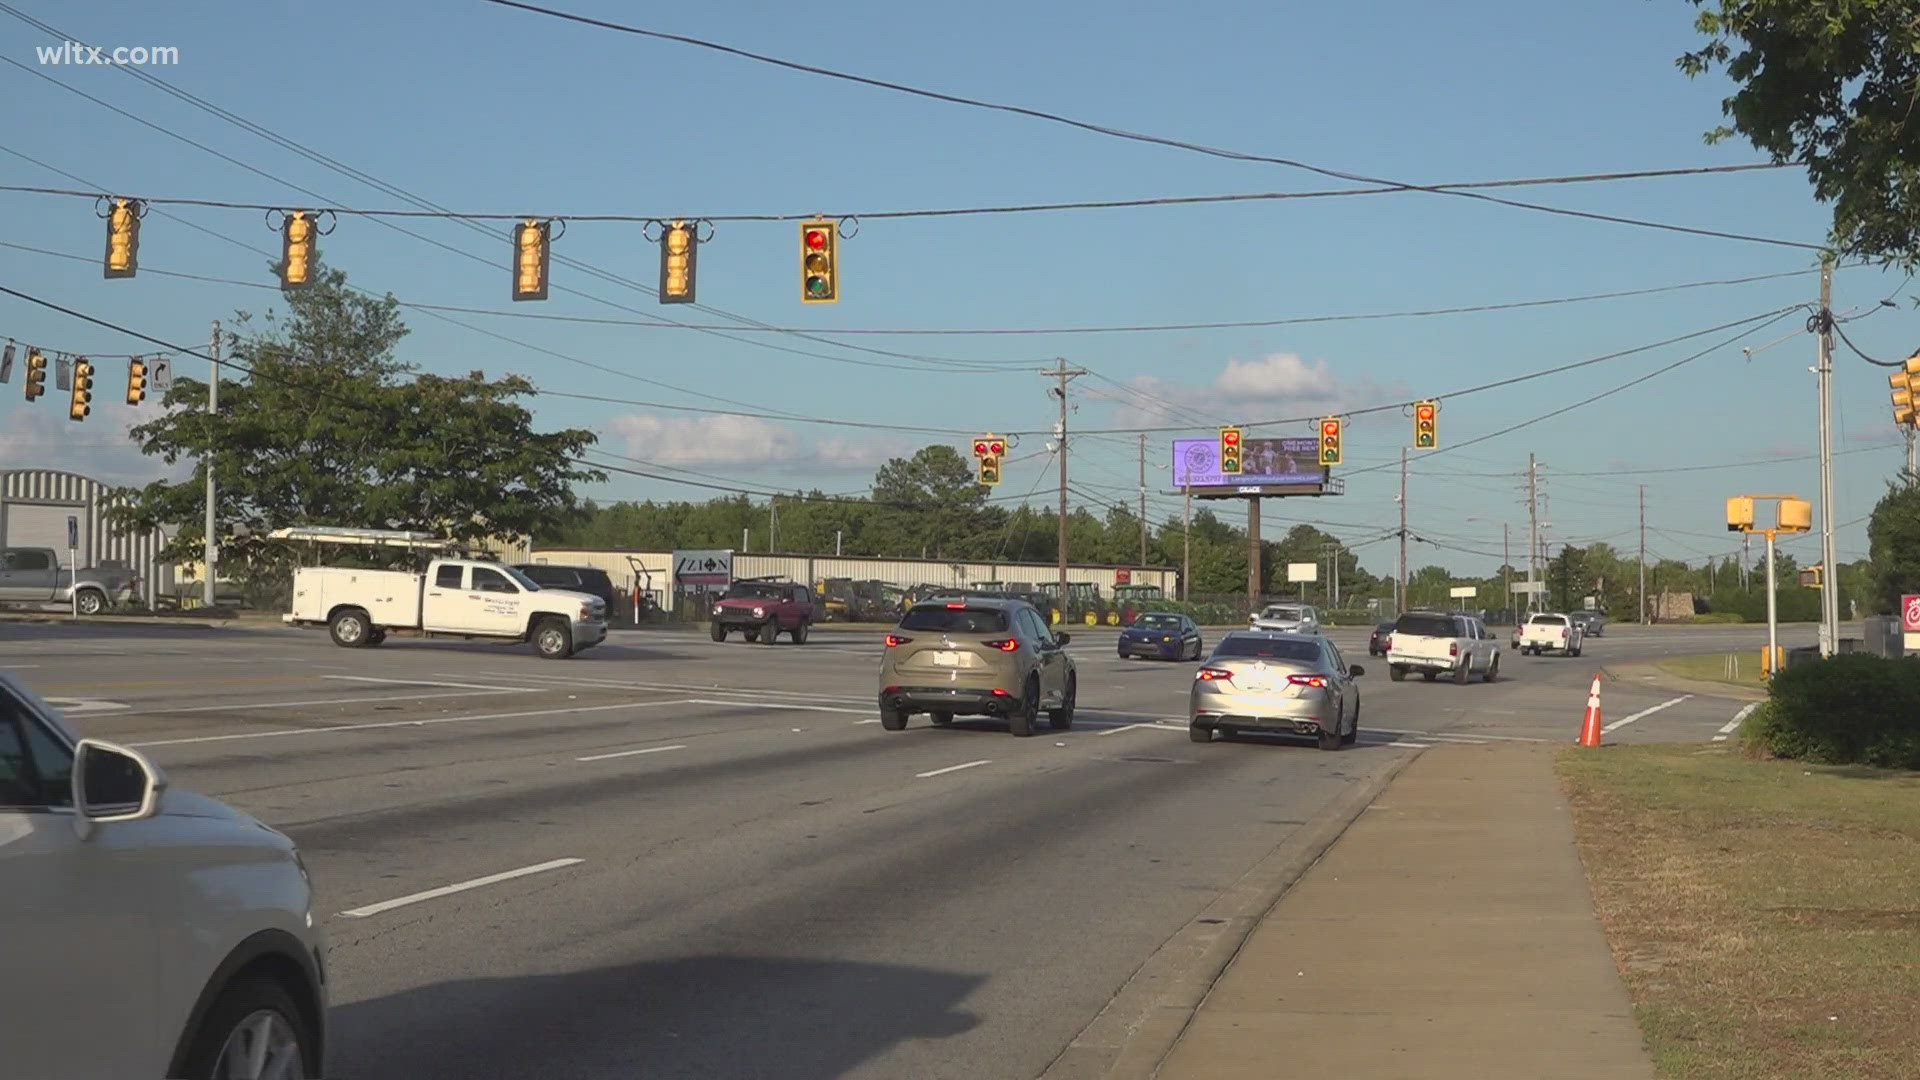 Town leaders are looking to alleviate traffic issues at Corley Mill road and Sunset Blvd.